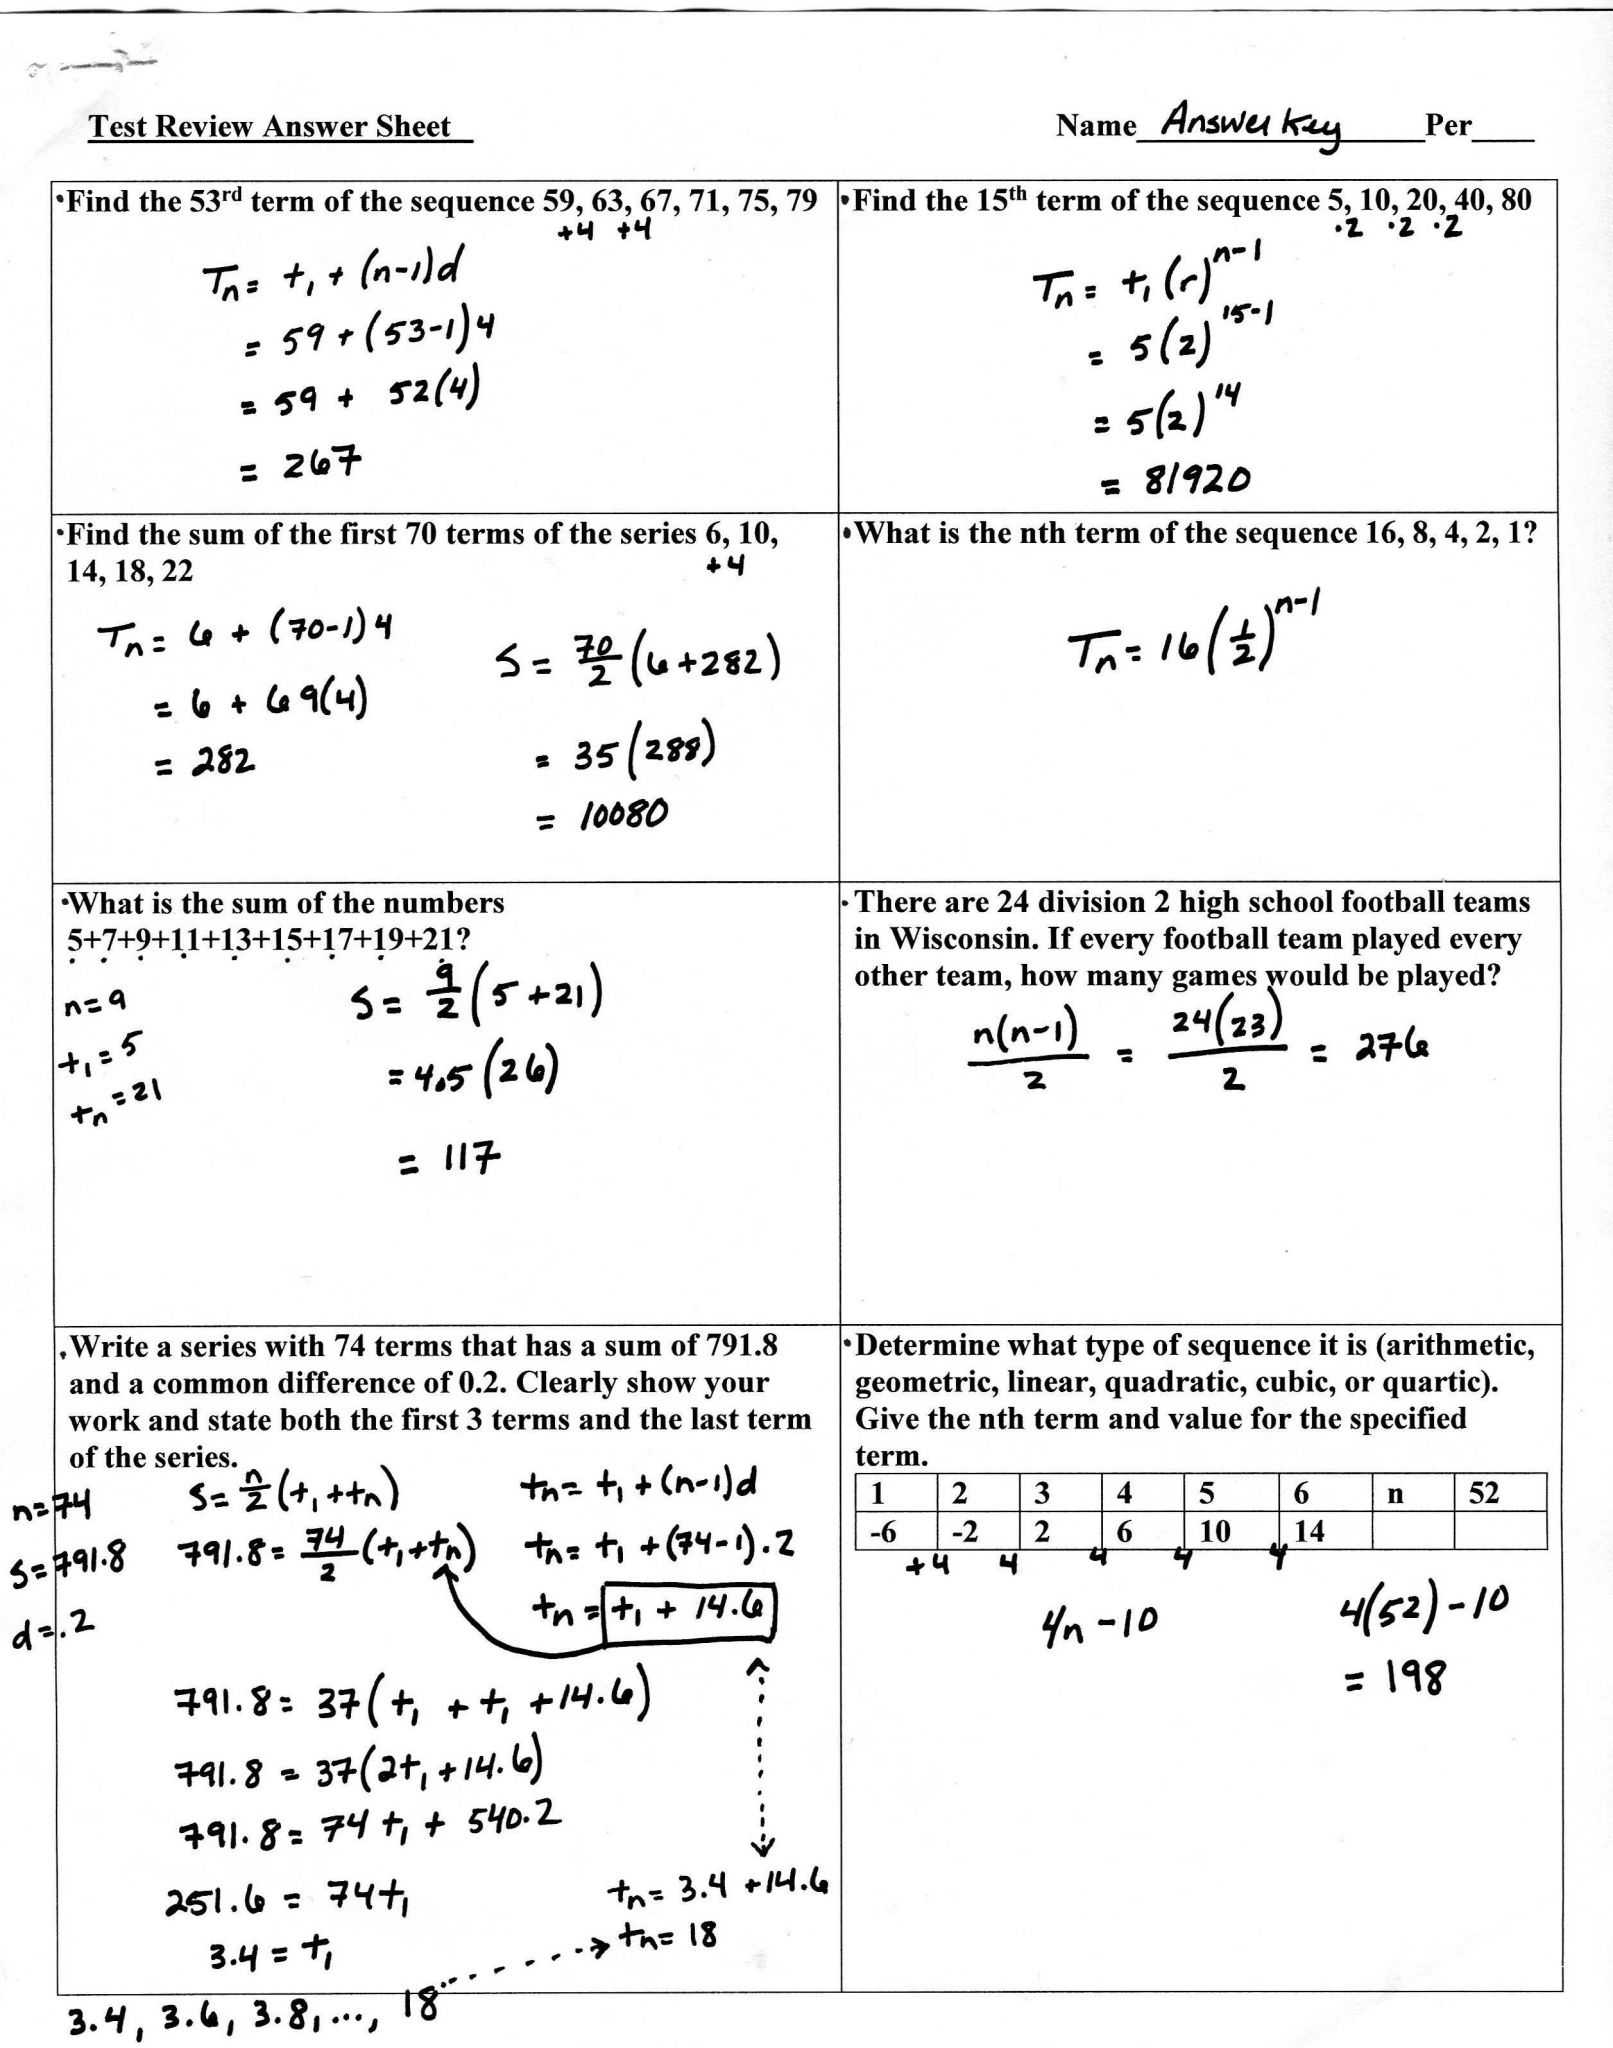 Arithmetic Sequence Worksheet Along with Geometric Sequences and Series Worksheet Answers Beautiful Worksheet